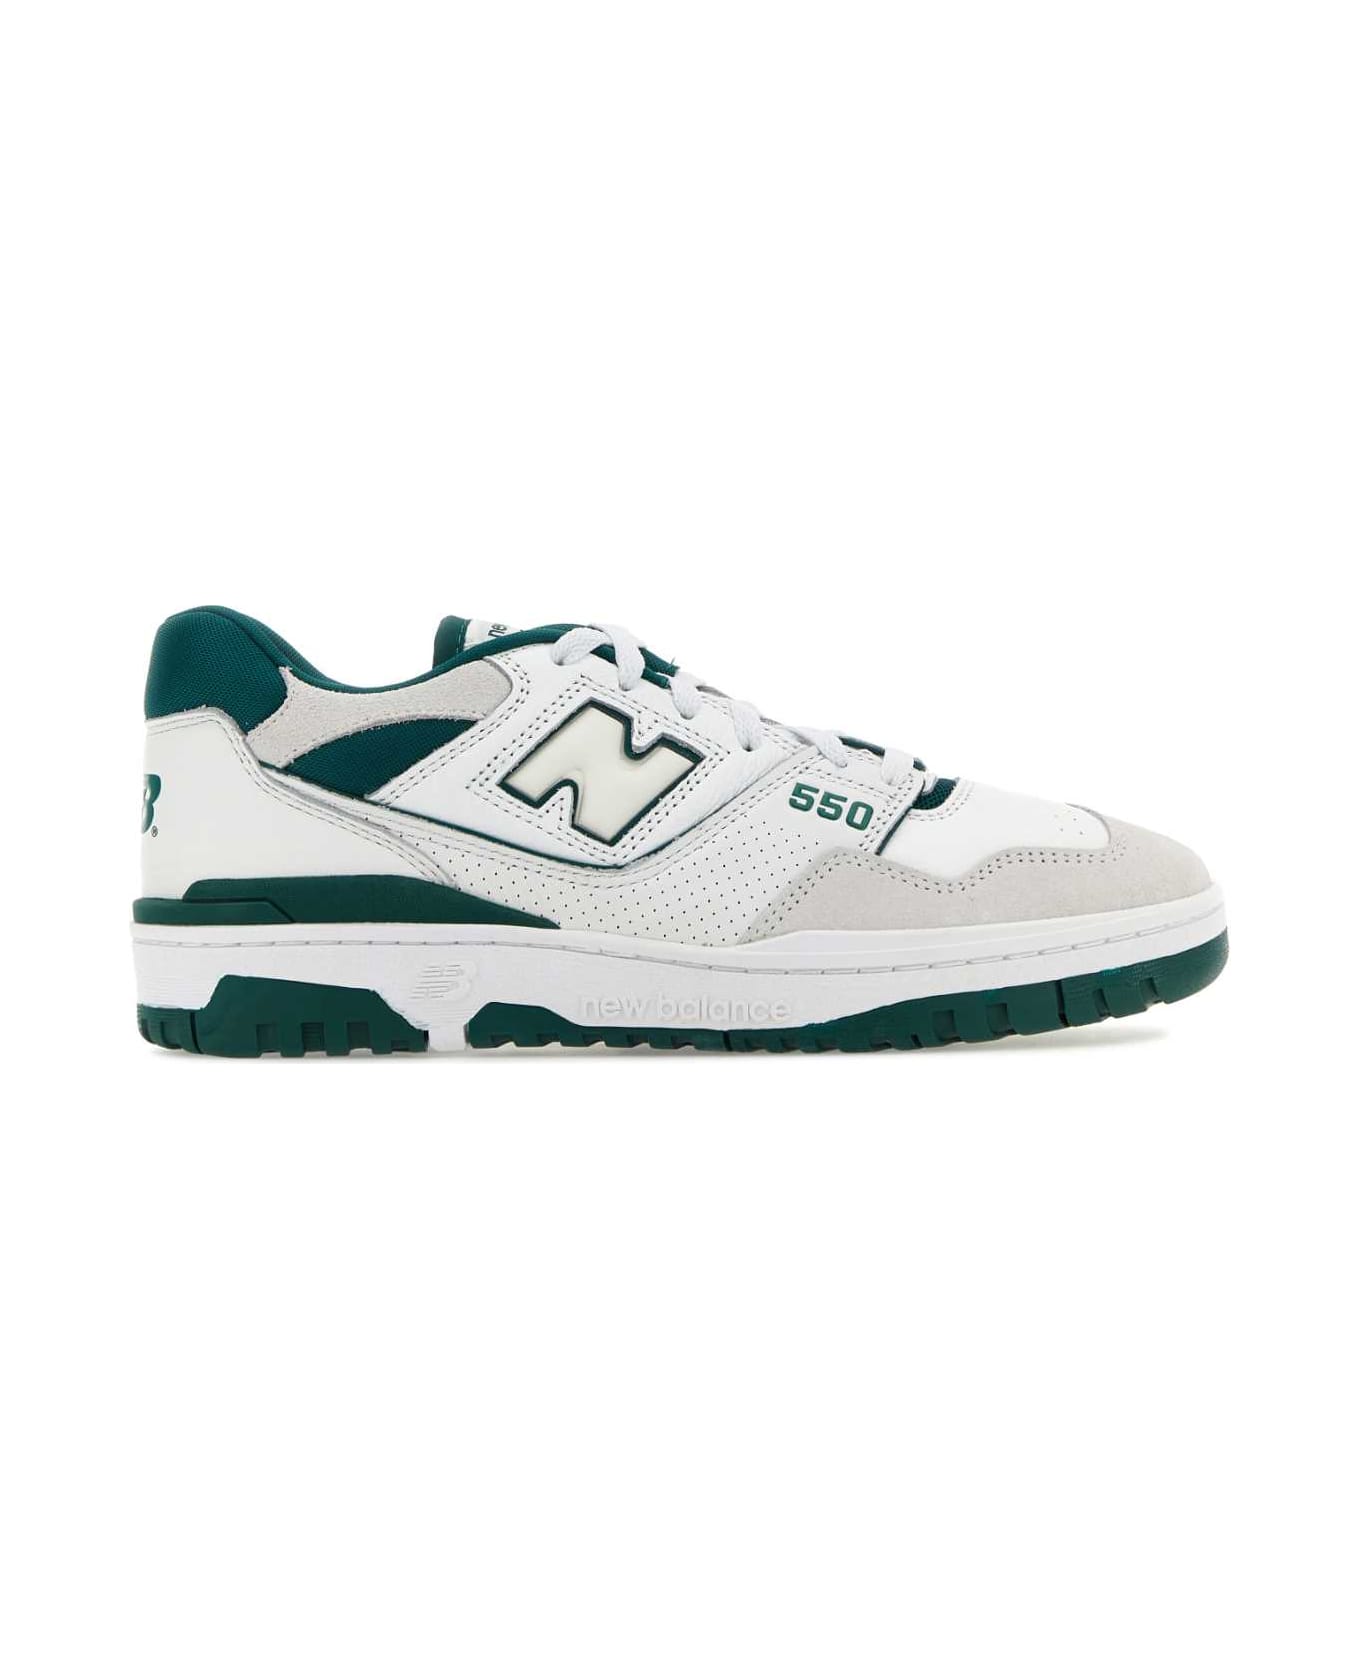 New Balance Two-tones Leather And Fabric 550 Sneakers - WHITE